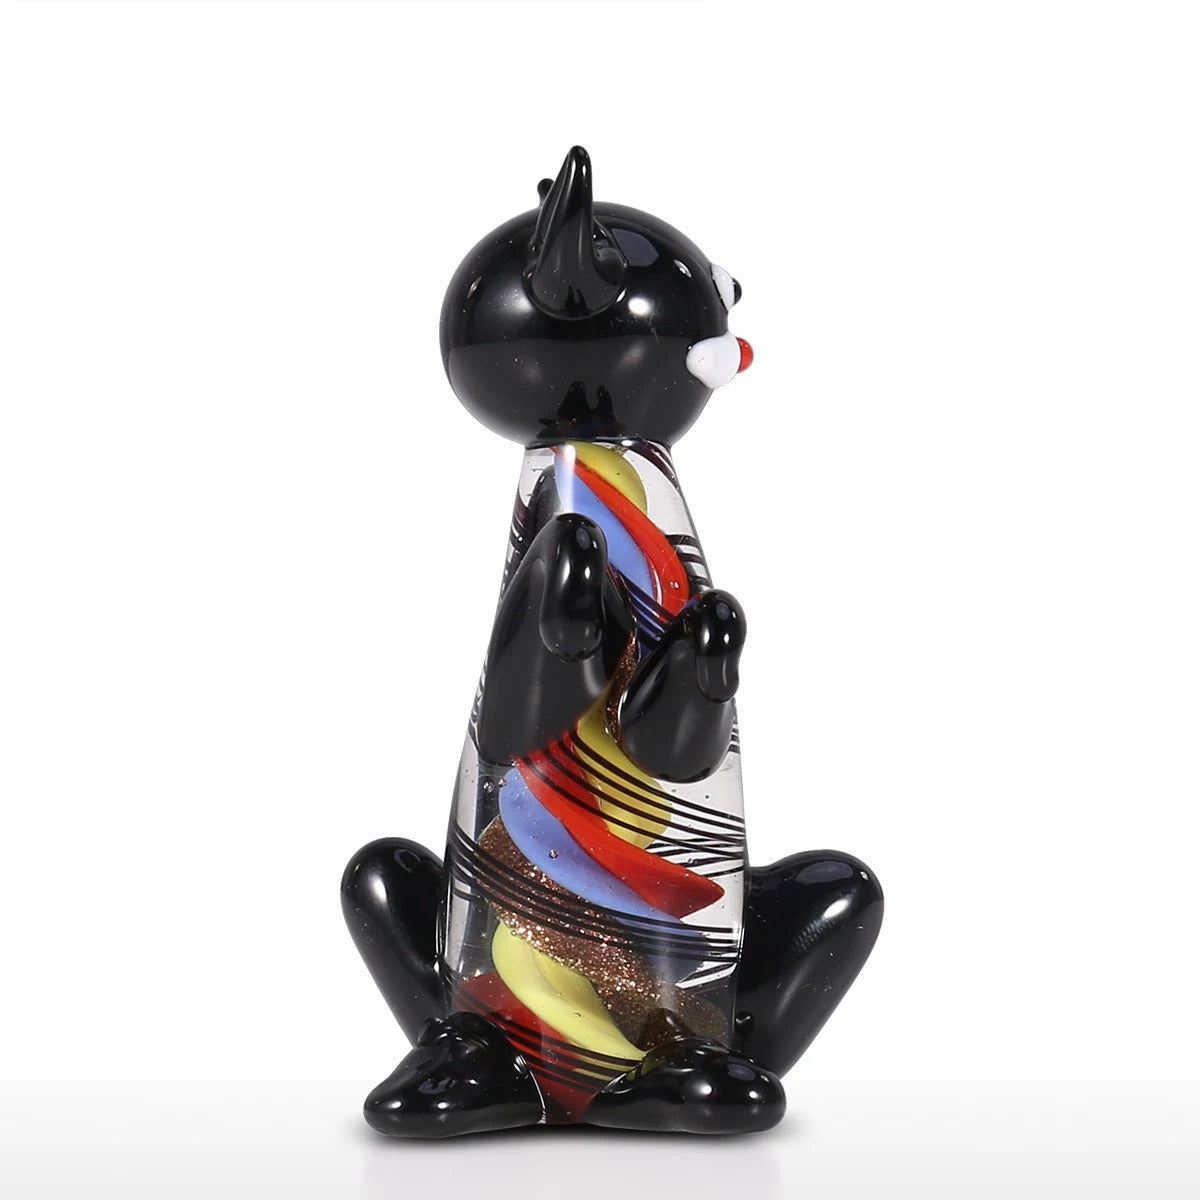 Glass Ornaments with Black Cat Figurines